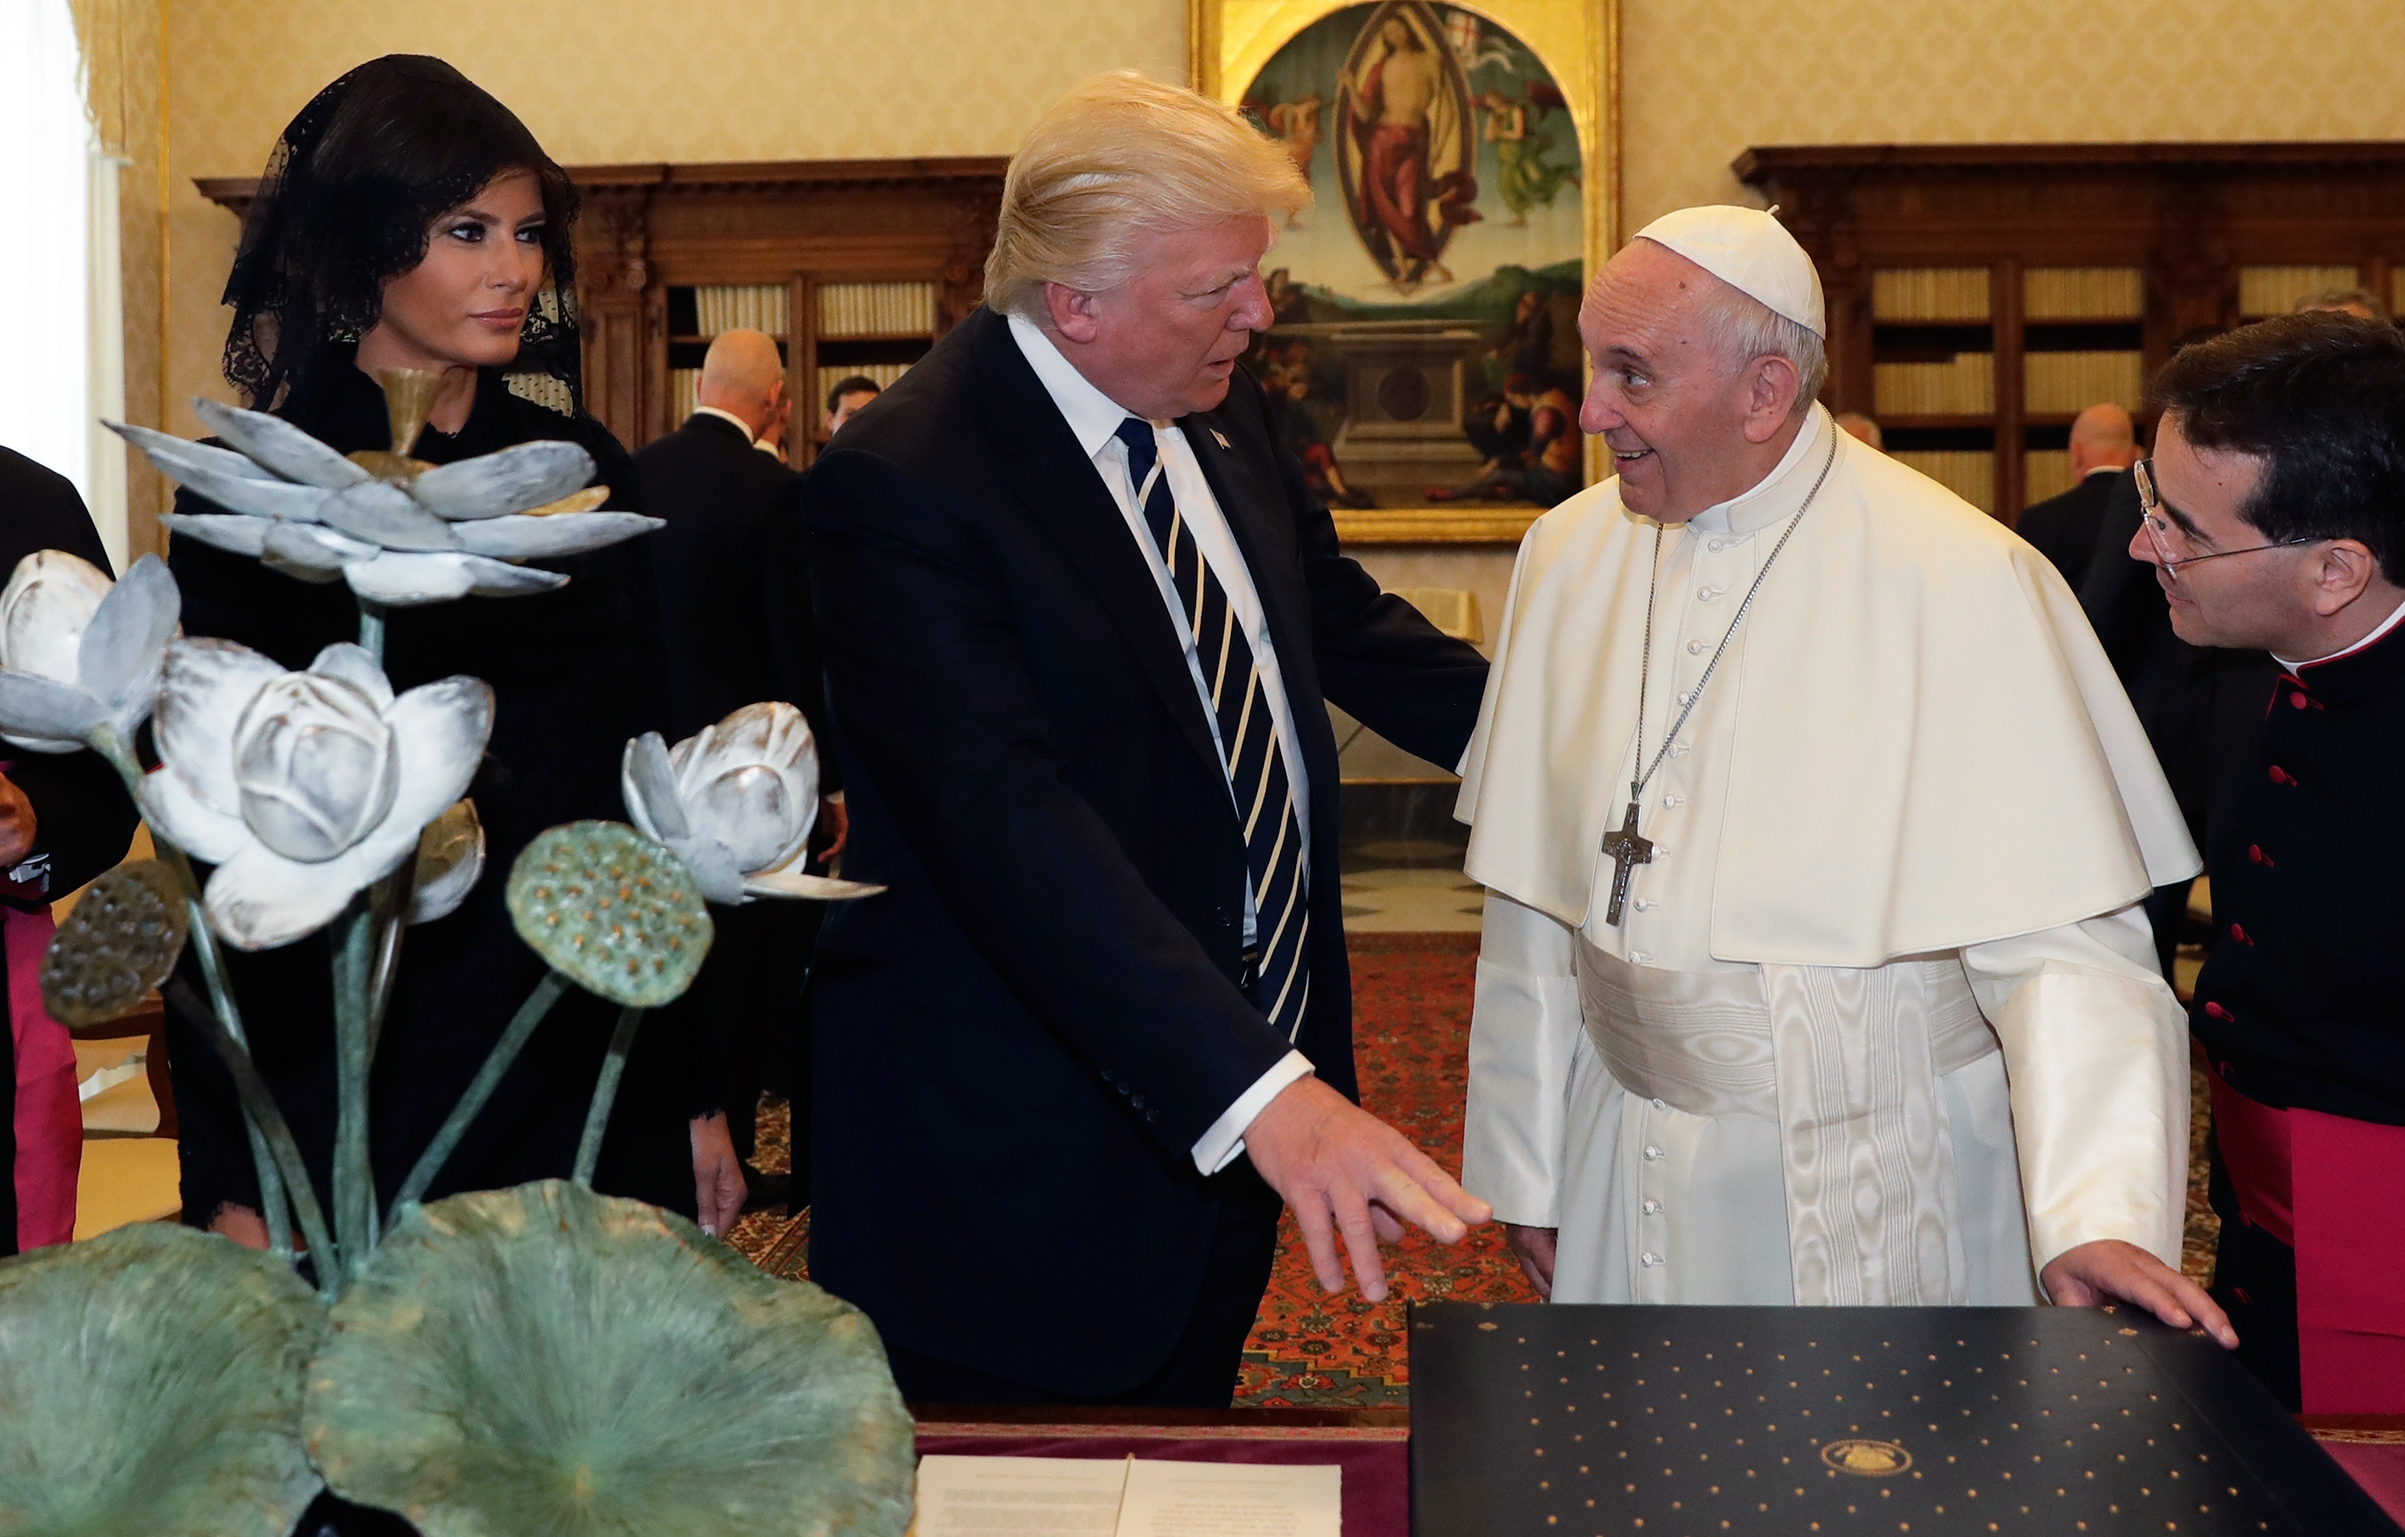 Pope Francis exchanges gifts with President Trump and First Lady Melania Trump at the Vatican on May 24, 2017. (Alessandra Tarantino—Pool/AP)